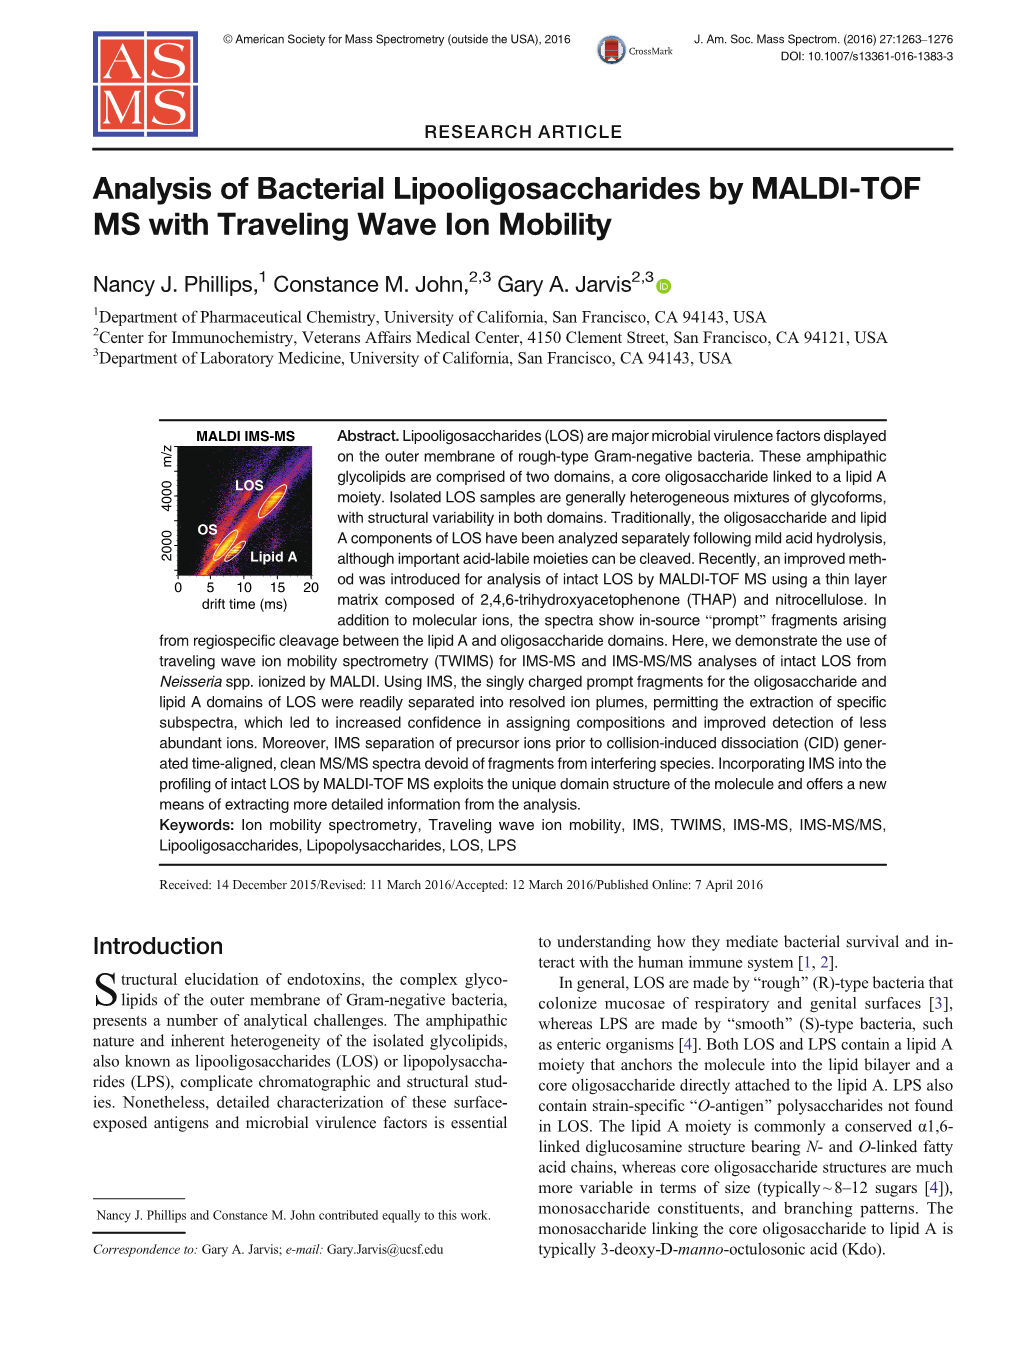 Analysis of Bacterial Lipooligosaccharides by MALDI-TOF MS with Traveling Wave Ion Mobility